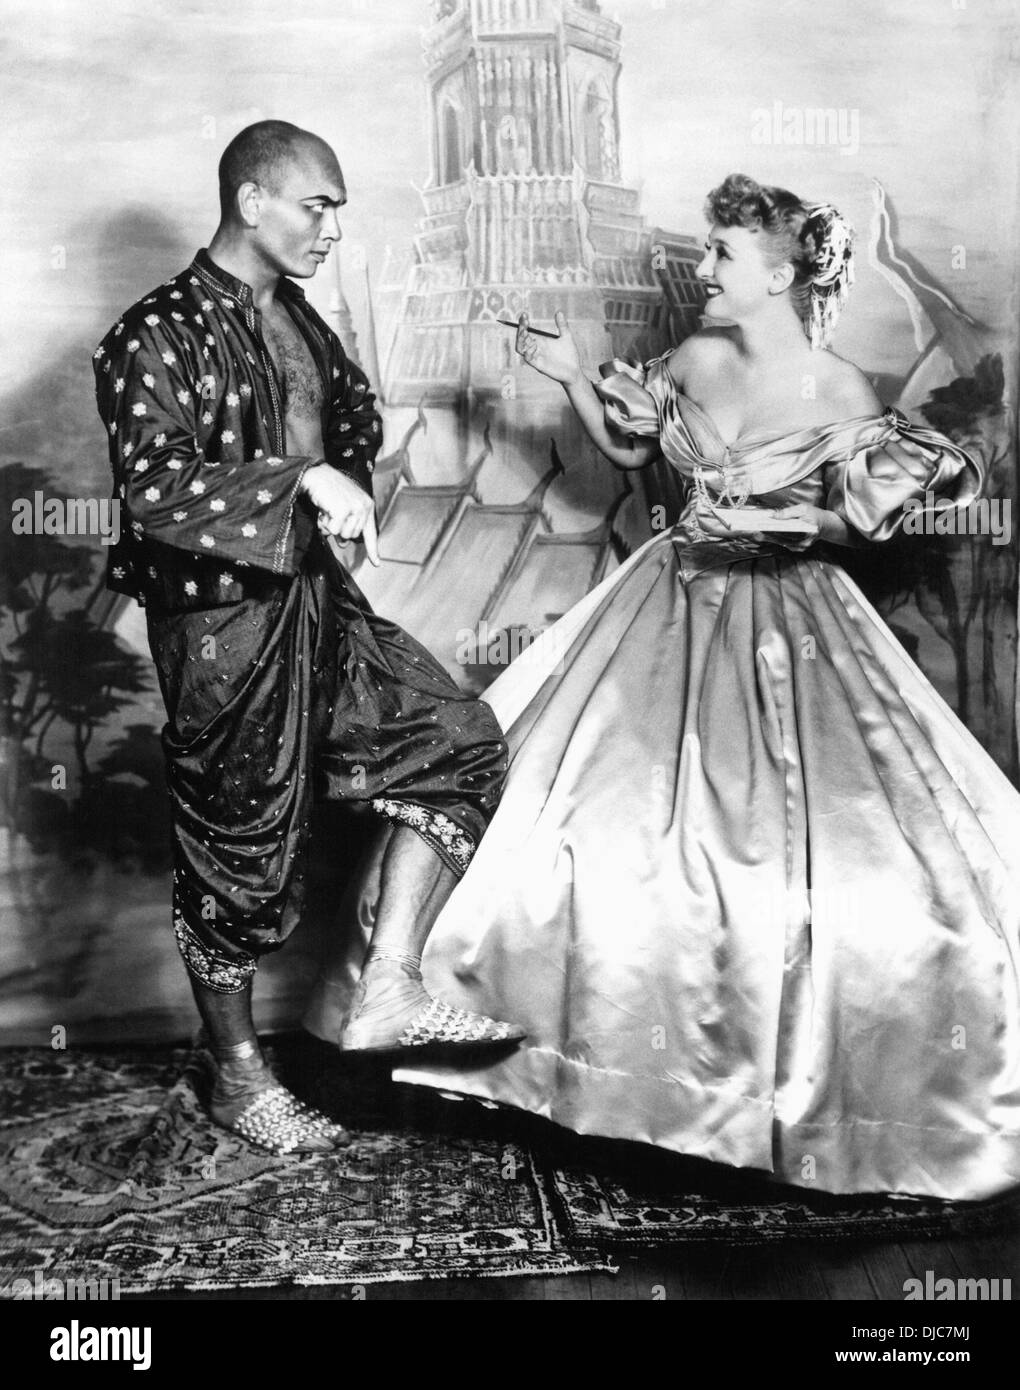 Yul Brynner and Celeste Holm, The King and I, St. James Theater, Broadway, New York City, 1952 Stock Photo